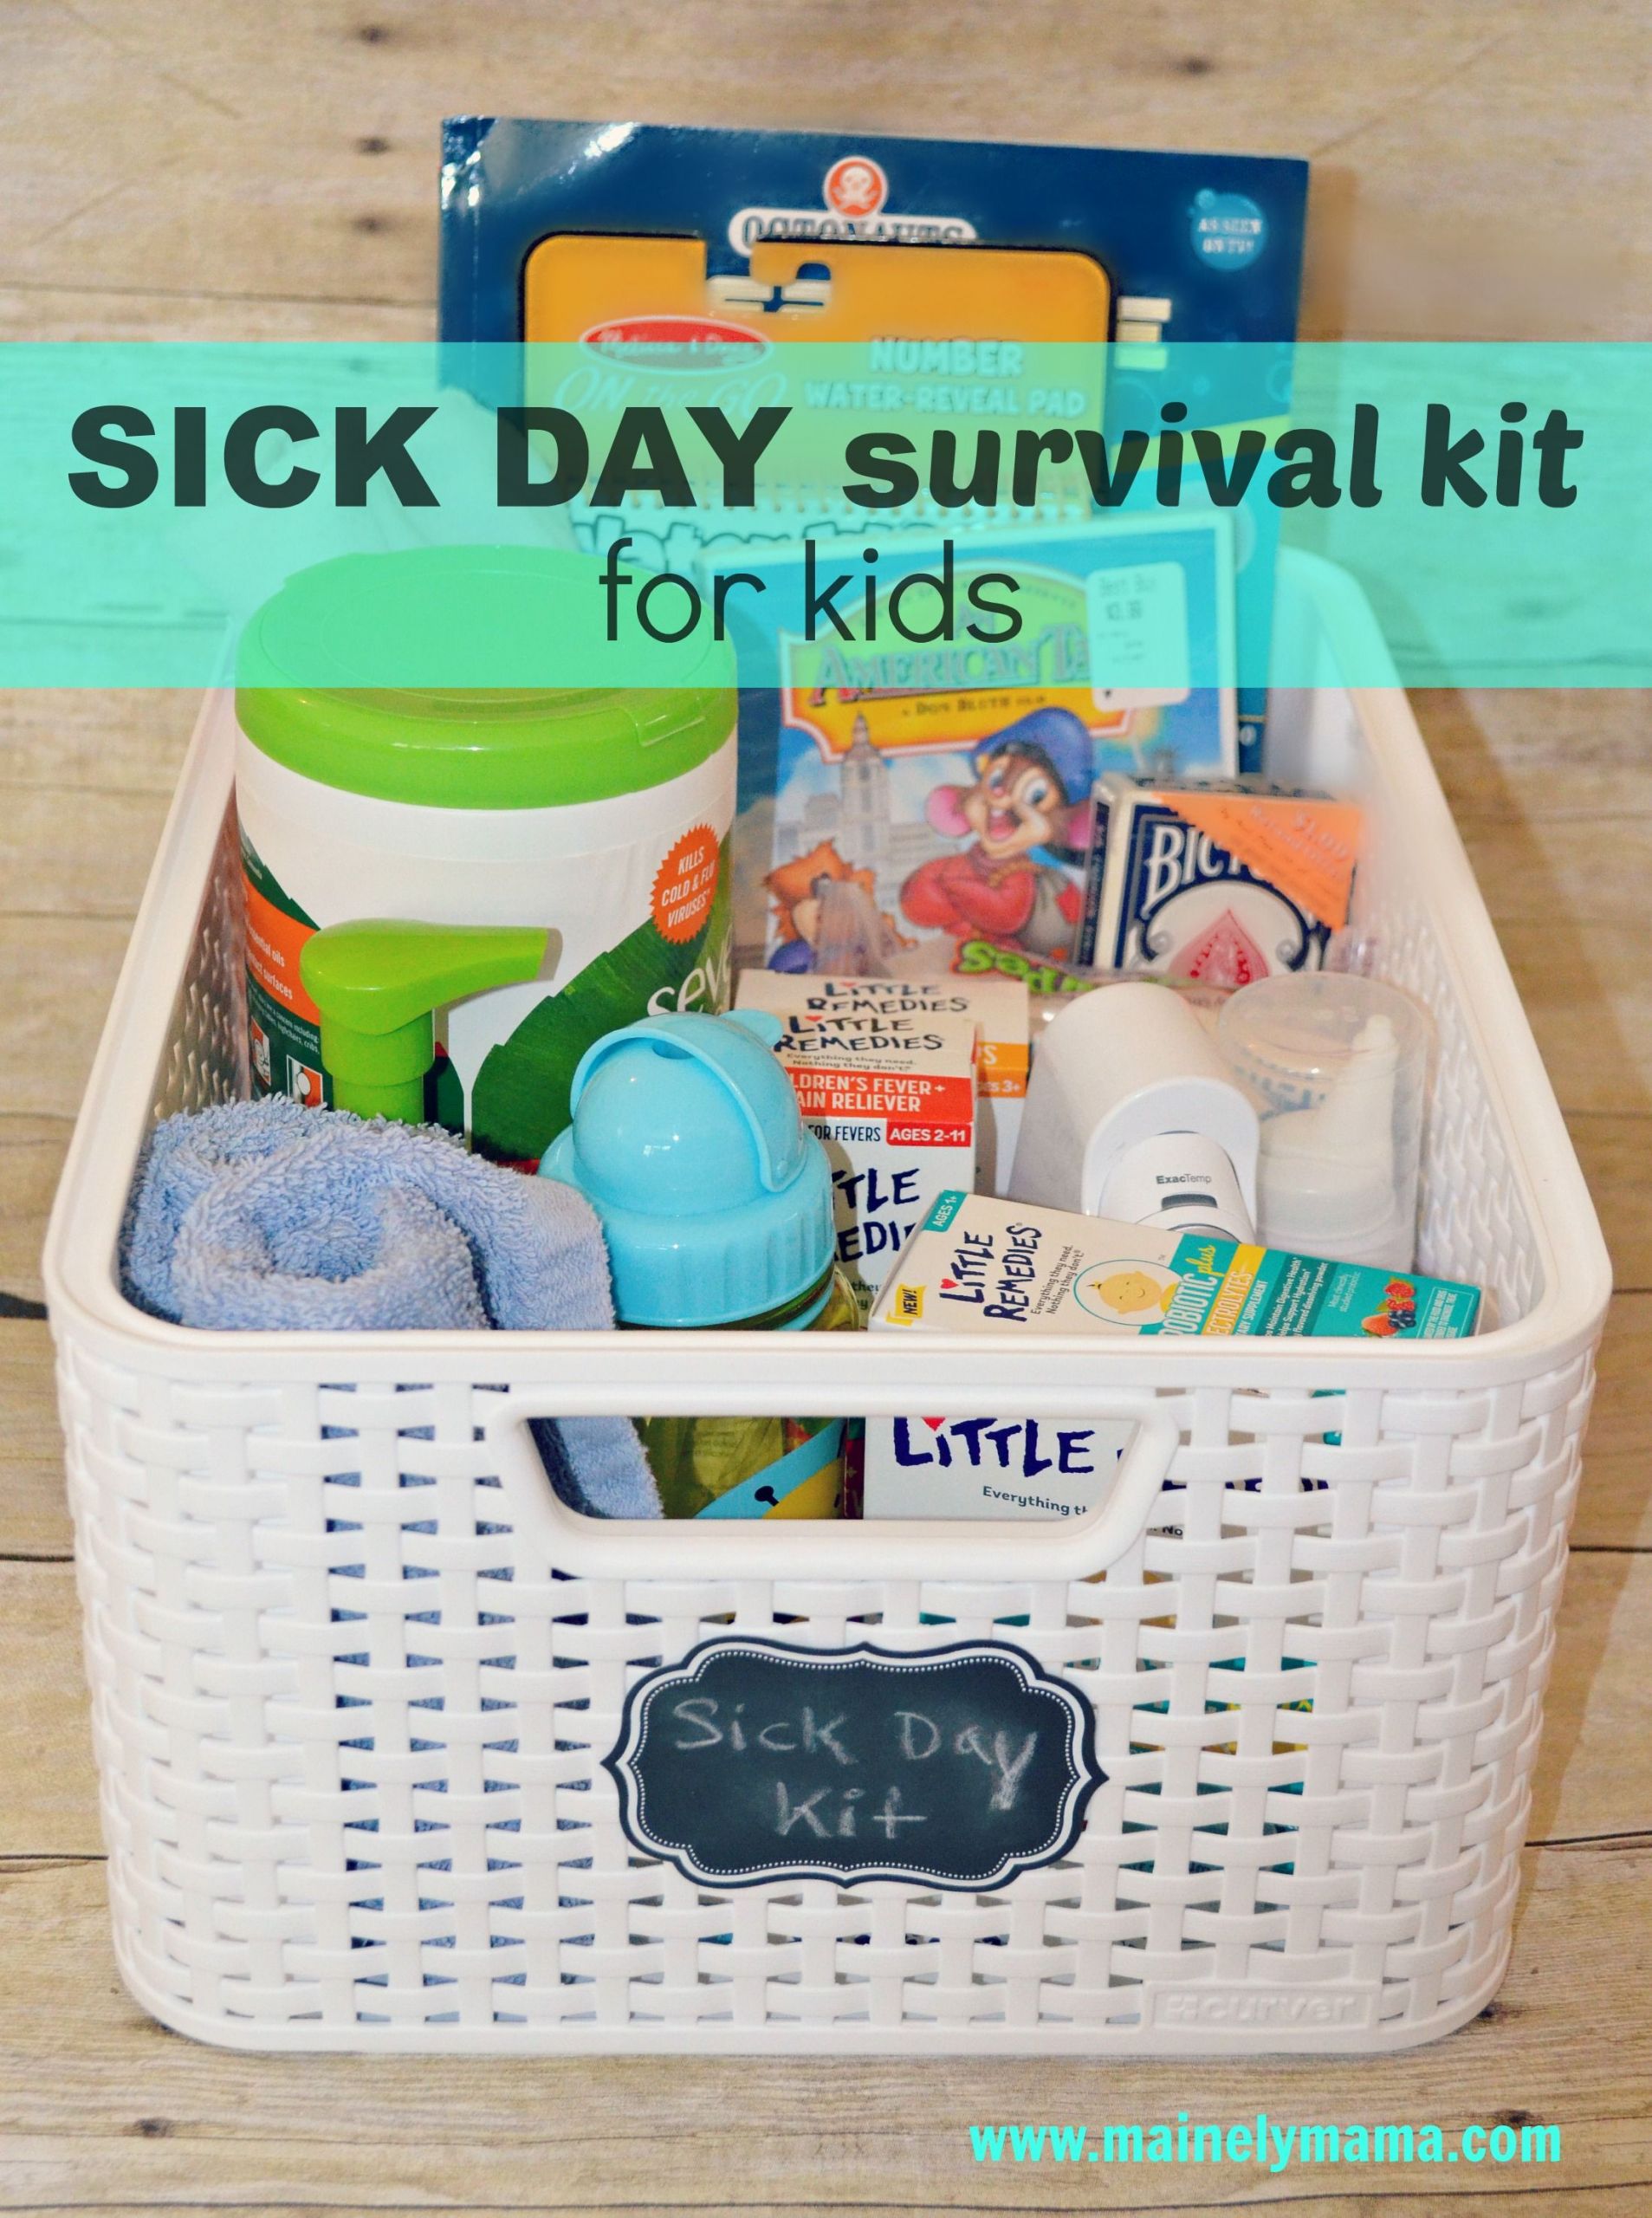 Gift Basket For Sick Child
 Be prepared with this SICK DAY survival kit for kids ad